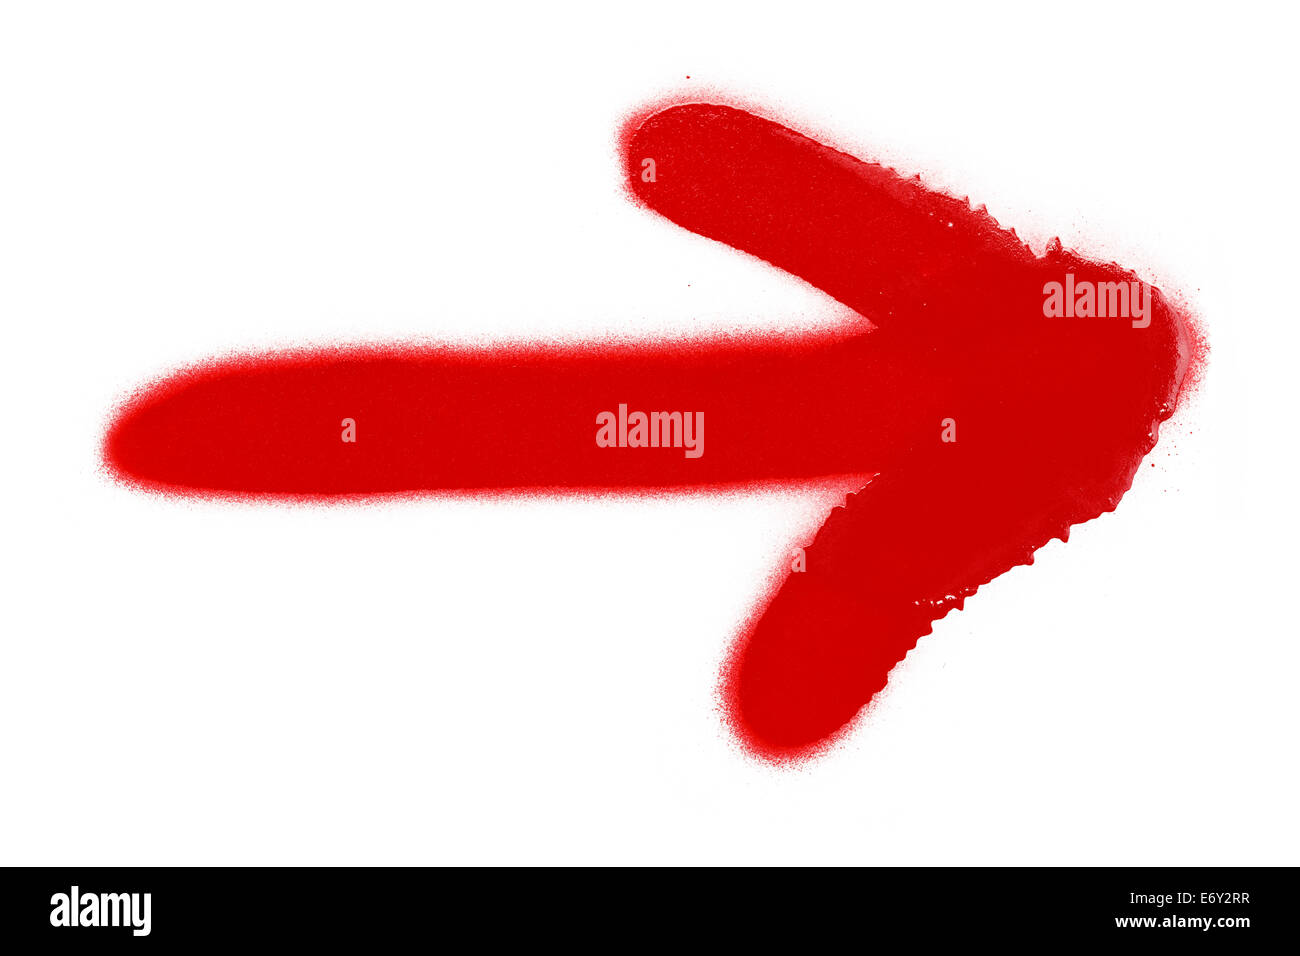 Red Spray Paint Arrow Isolated on White Background. Stock Photo